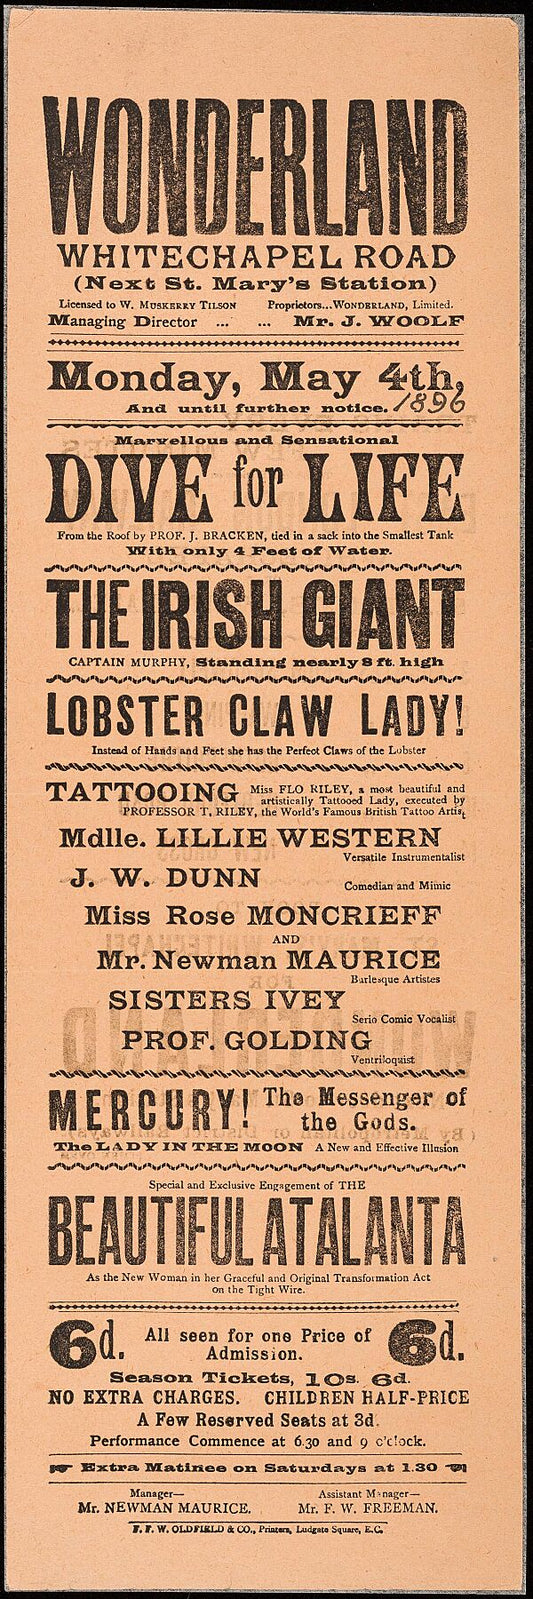 Monday, May 4th, and until further notice - dive for life ... The Irish Giant, Captain Murphy 1886